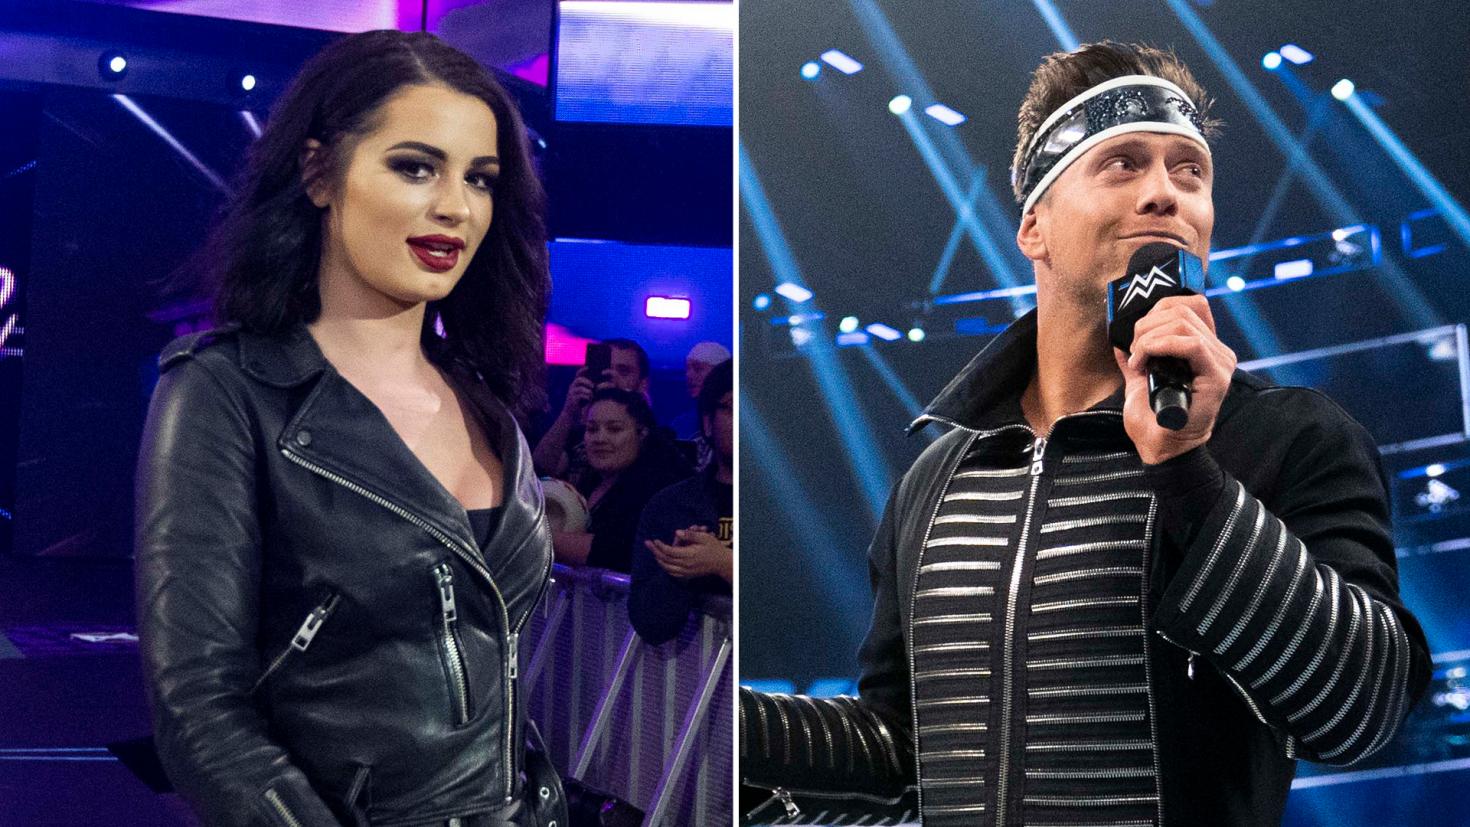 The Miz and Paige sign new multi-year deals with WWE